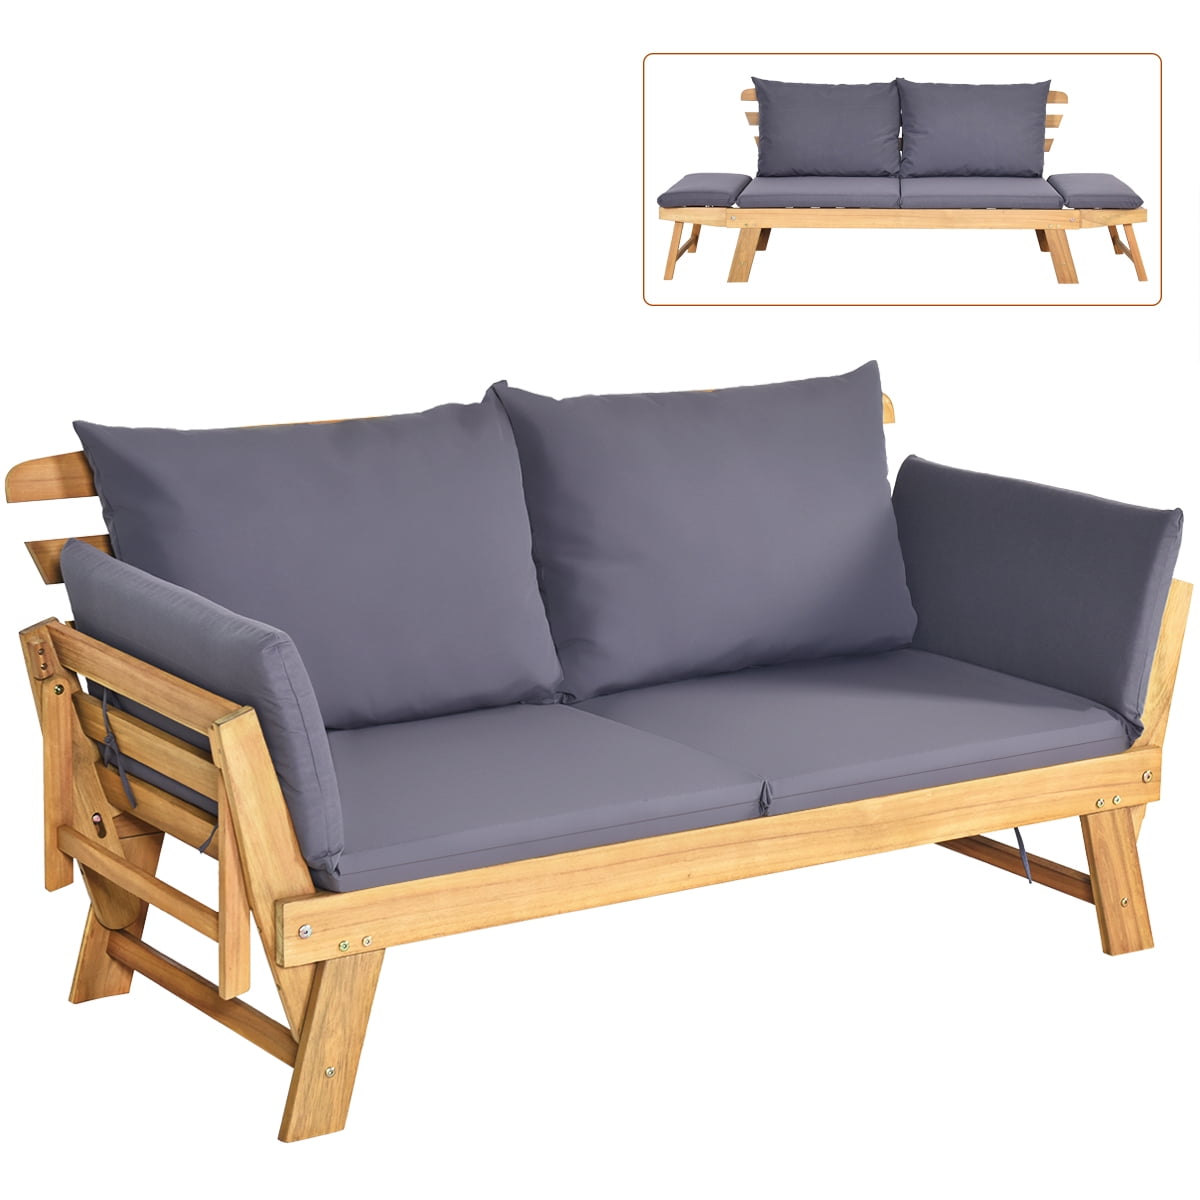 Folding Daybed Patio Acacia Wood Convertible Couch Sofa - Walmart.com